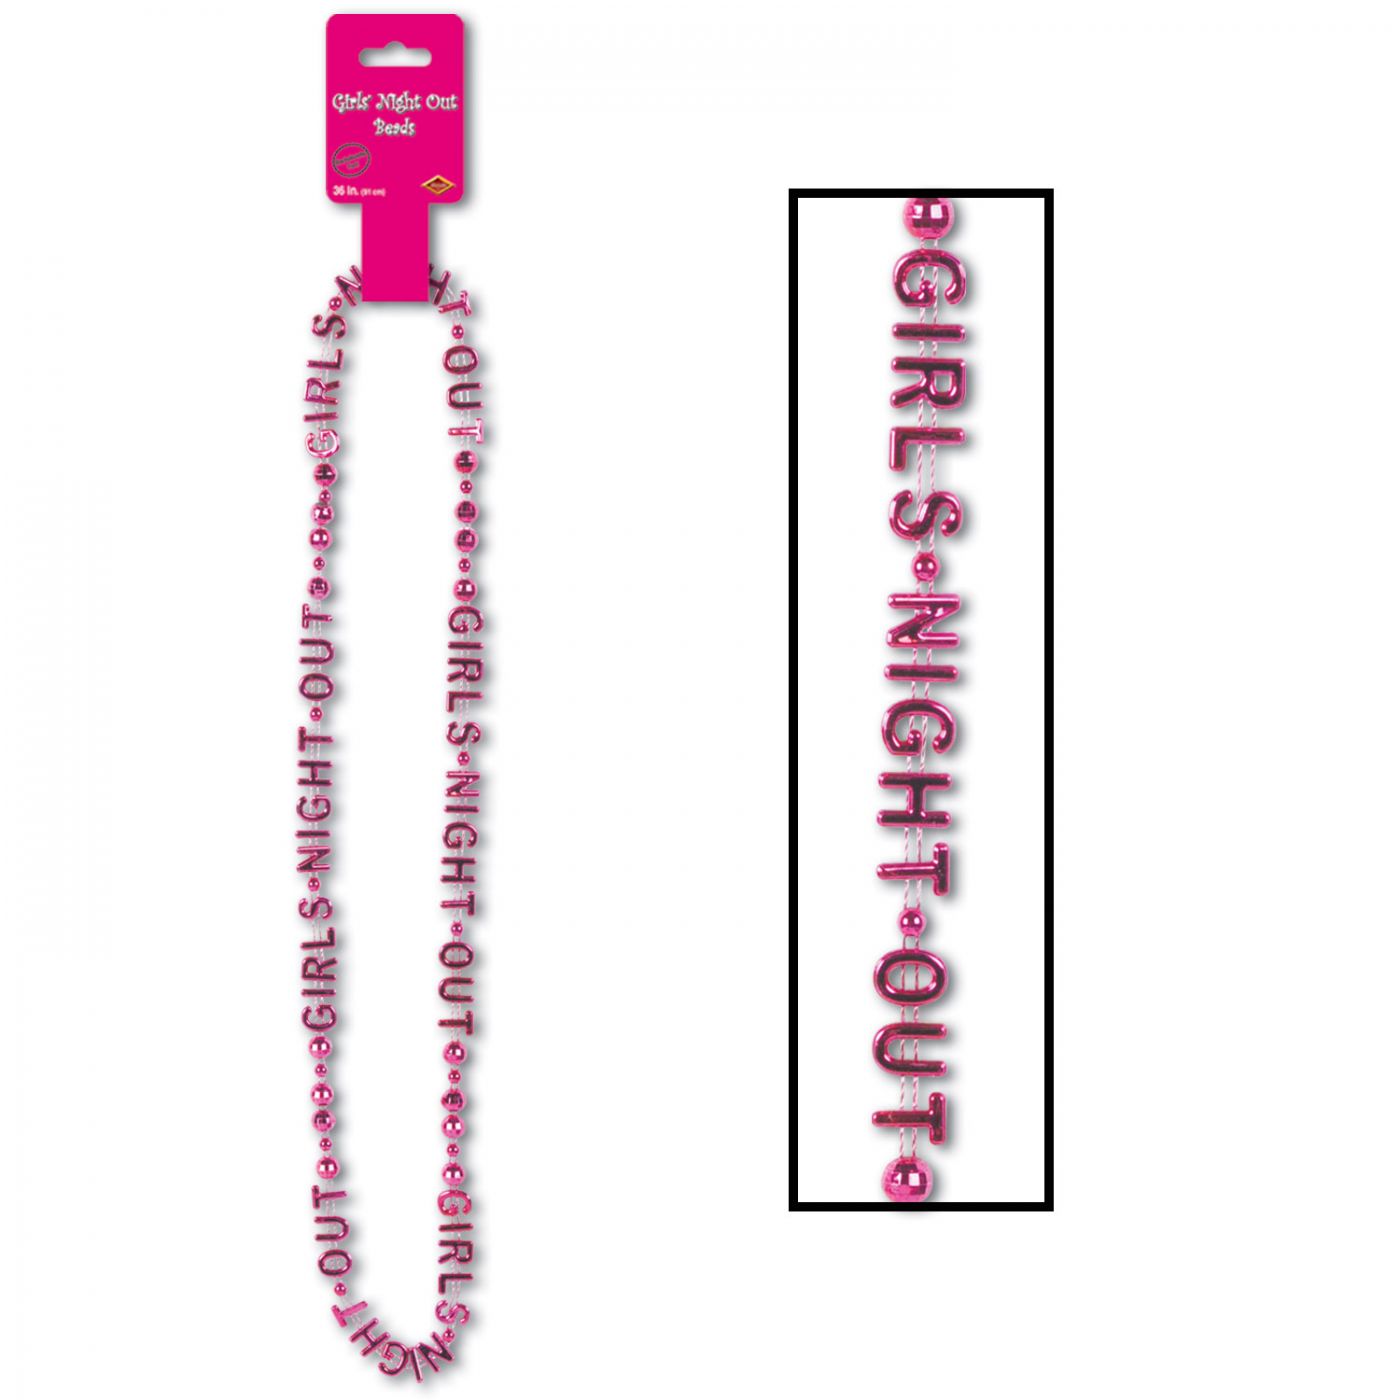 Girls' Night Out Beads-Of-Expression image